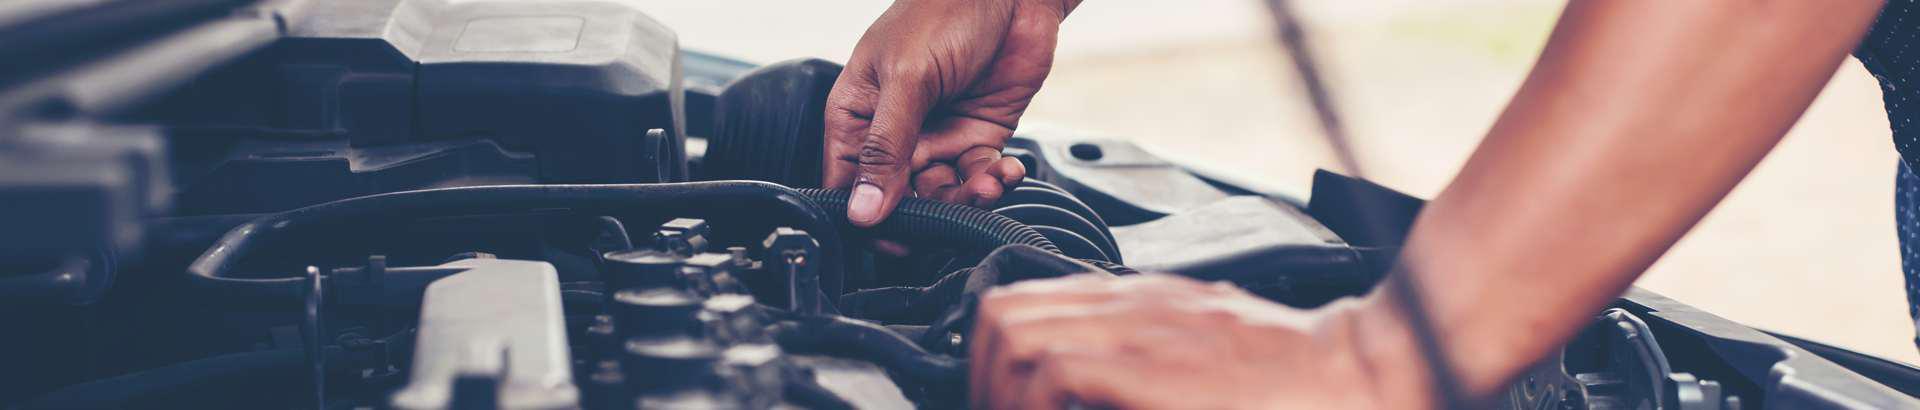 Repair of engines and other related services, products, consultations